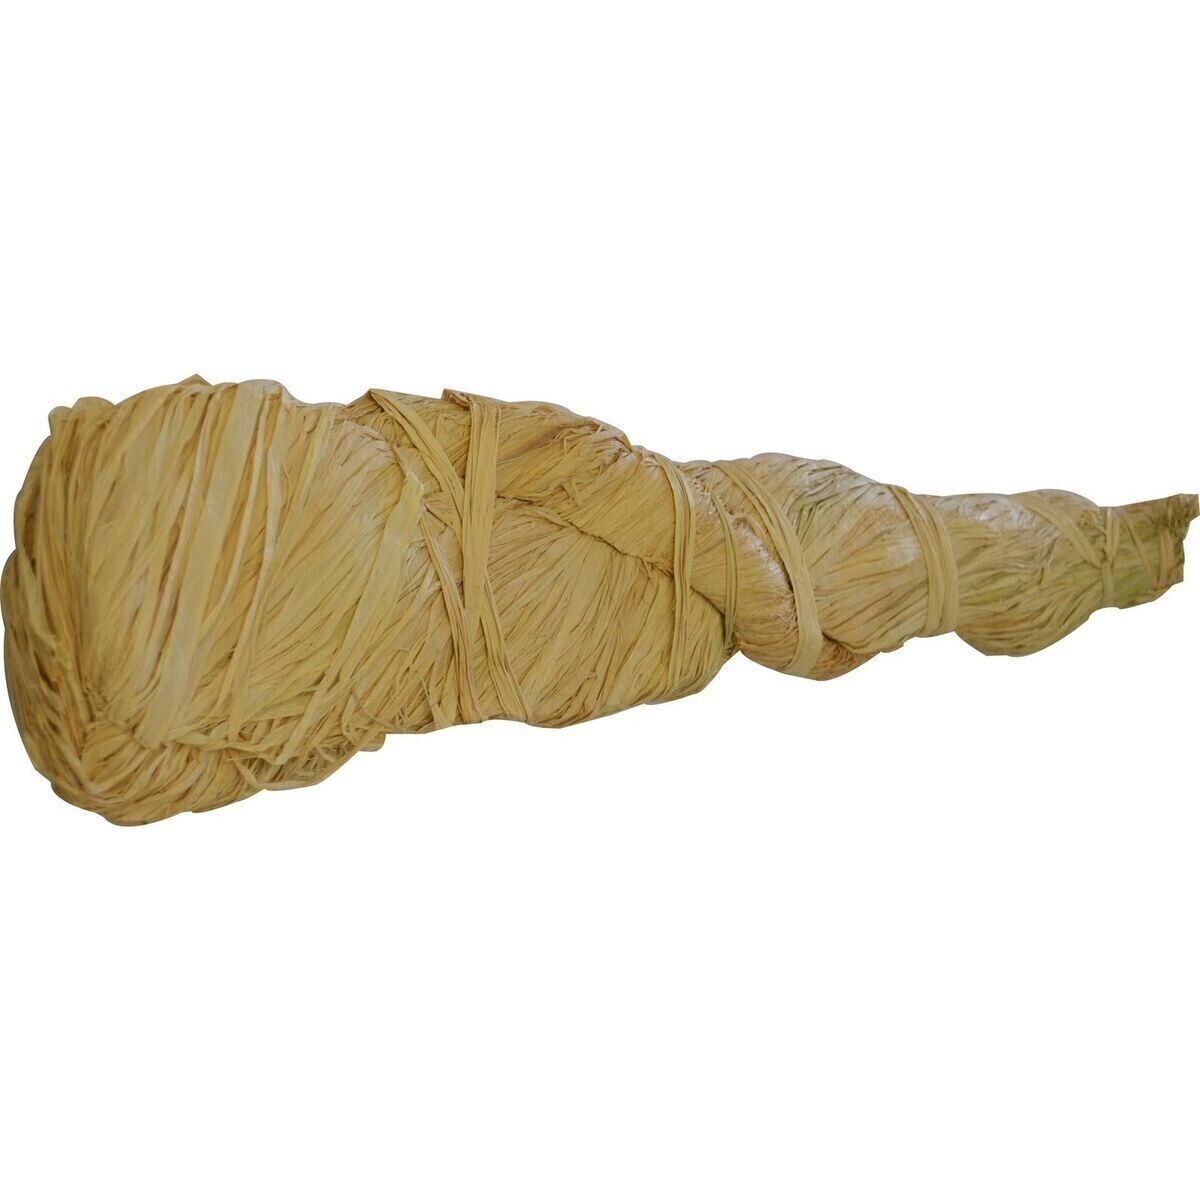 1kg Raffia Hank Natural Art Crafting Gift Wrapping Eco friendly- Same Day Post